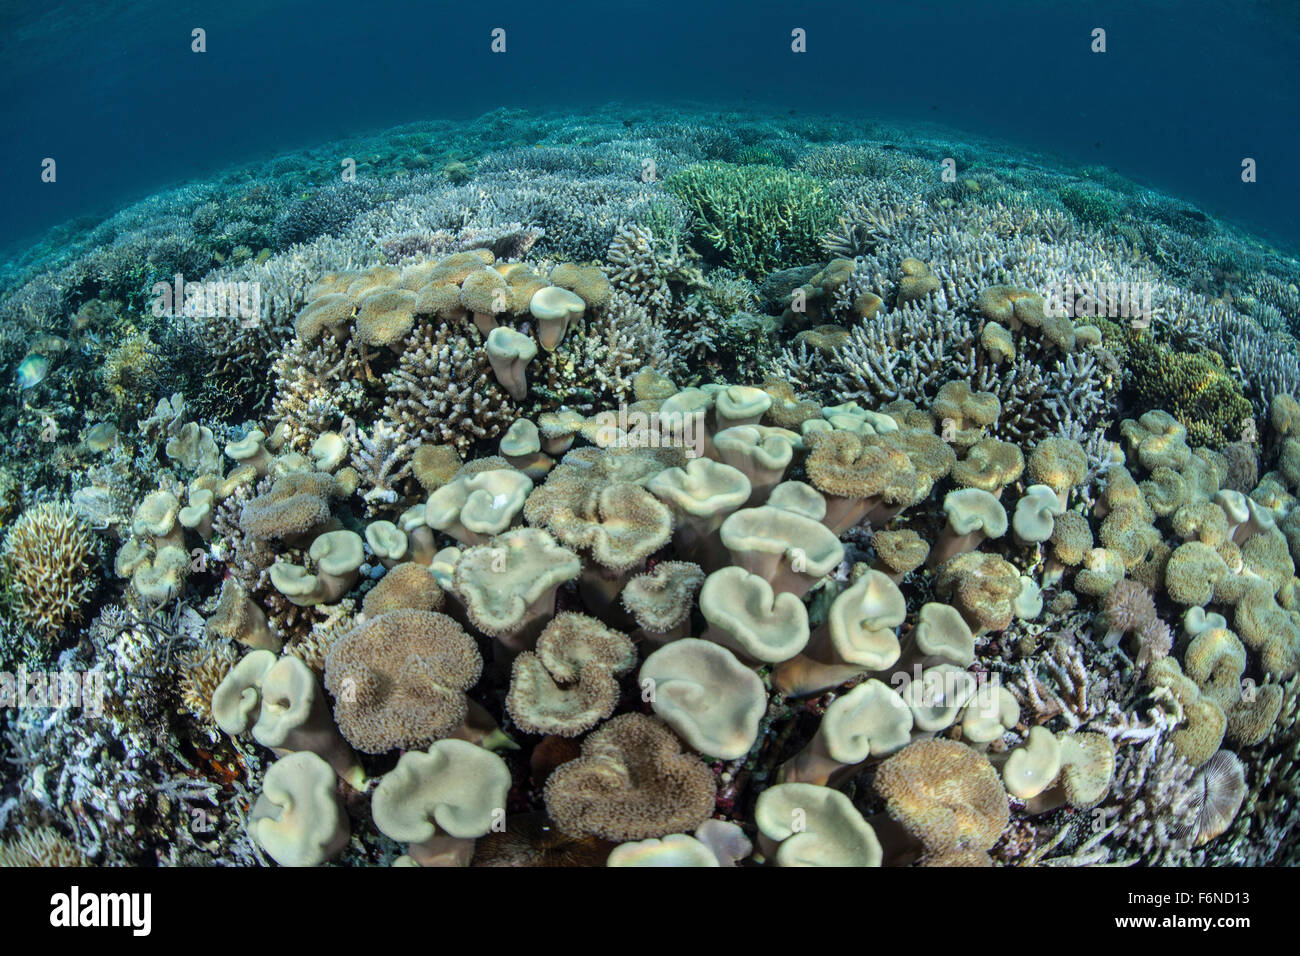 Mushroom and hard corals thrive in shallow water in Alor, Indonesia. This remote region is known for its beautiful reefs and spe Stock Photo